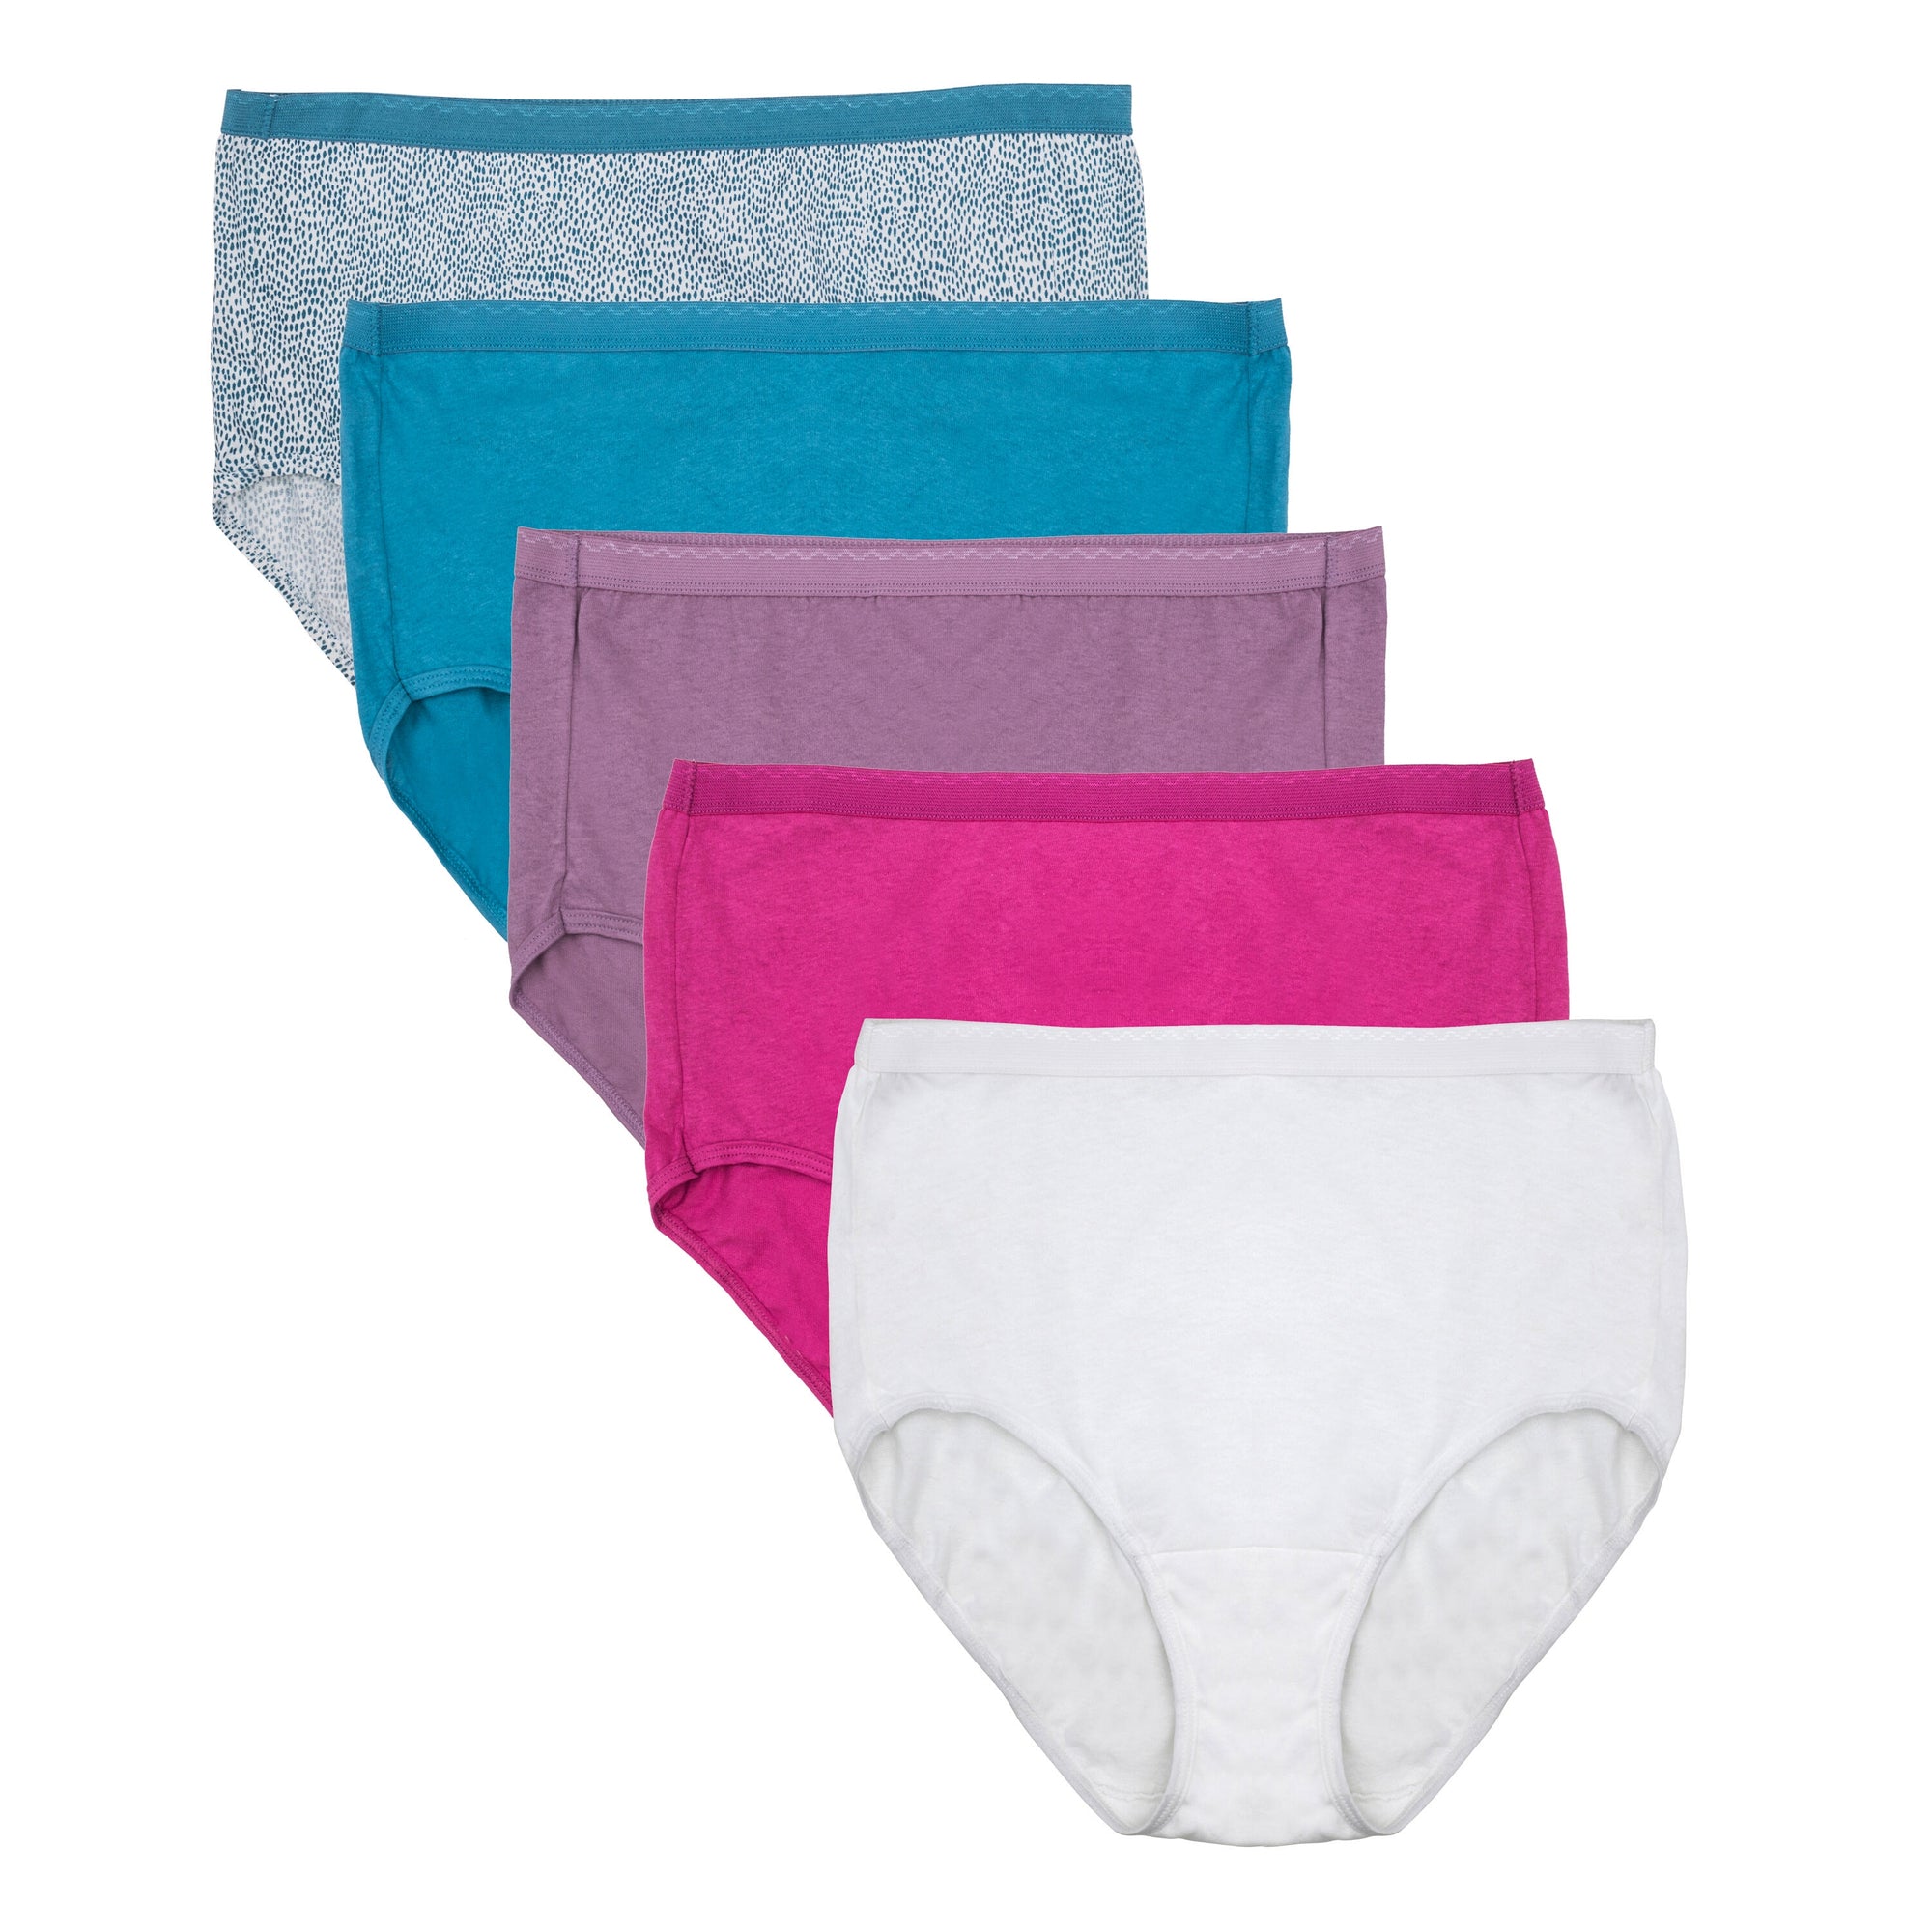 Fruit of the Loom Women's Plus Fit High-Rise Cotton Briefs with